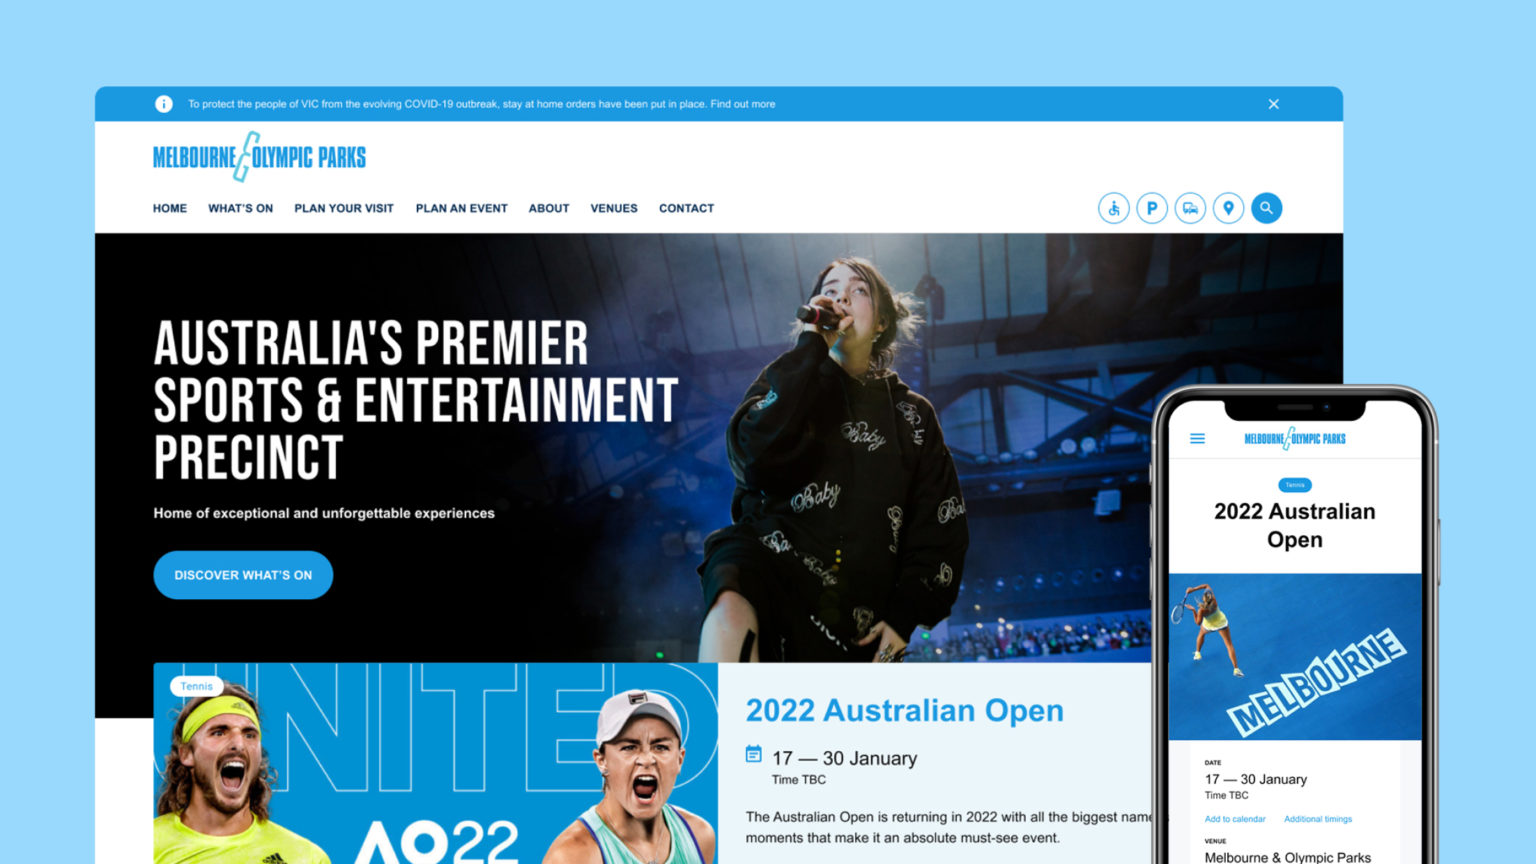 whiteGREY created a new web infrastructure of Melbourne & Olympic Parks.